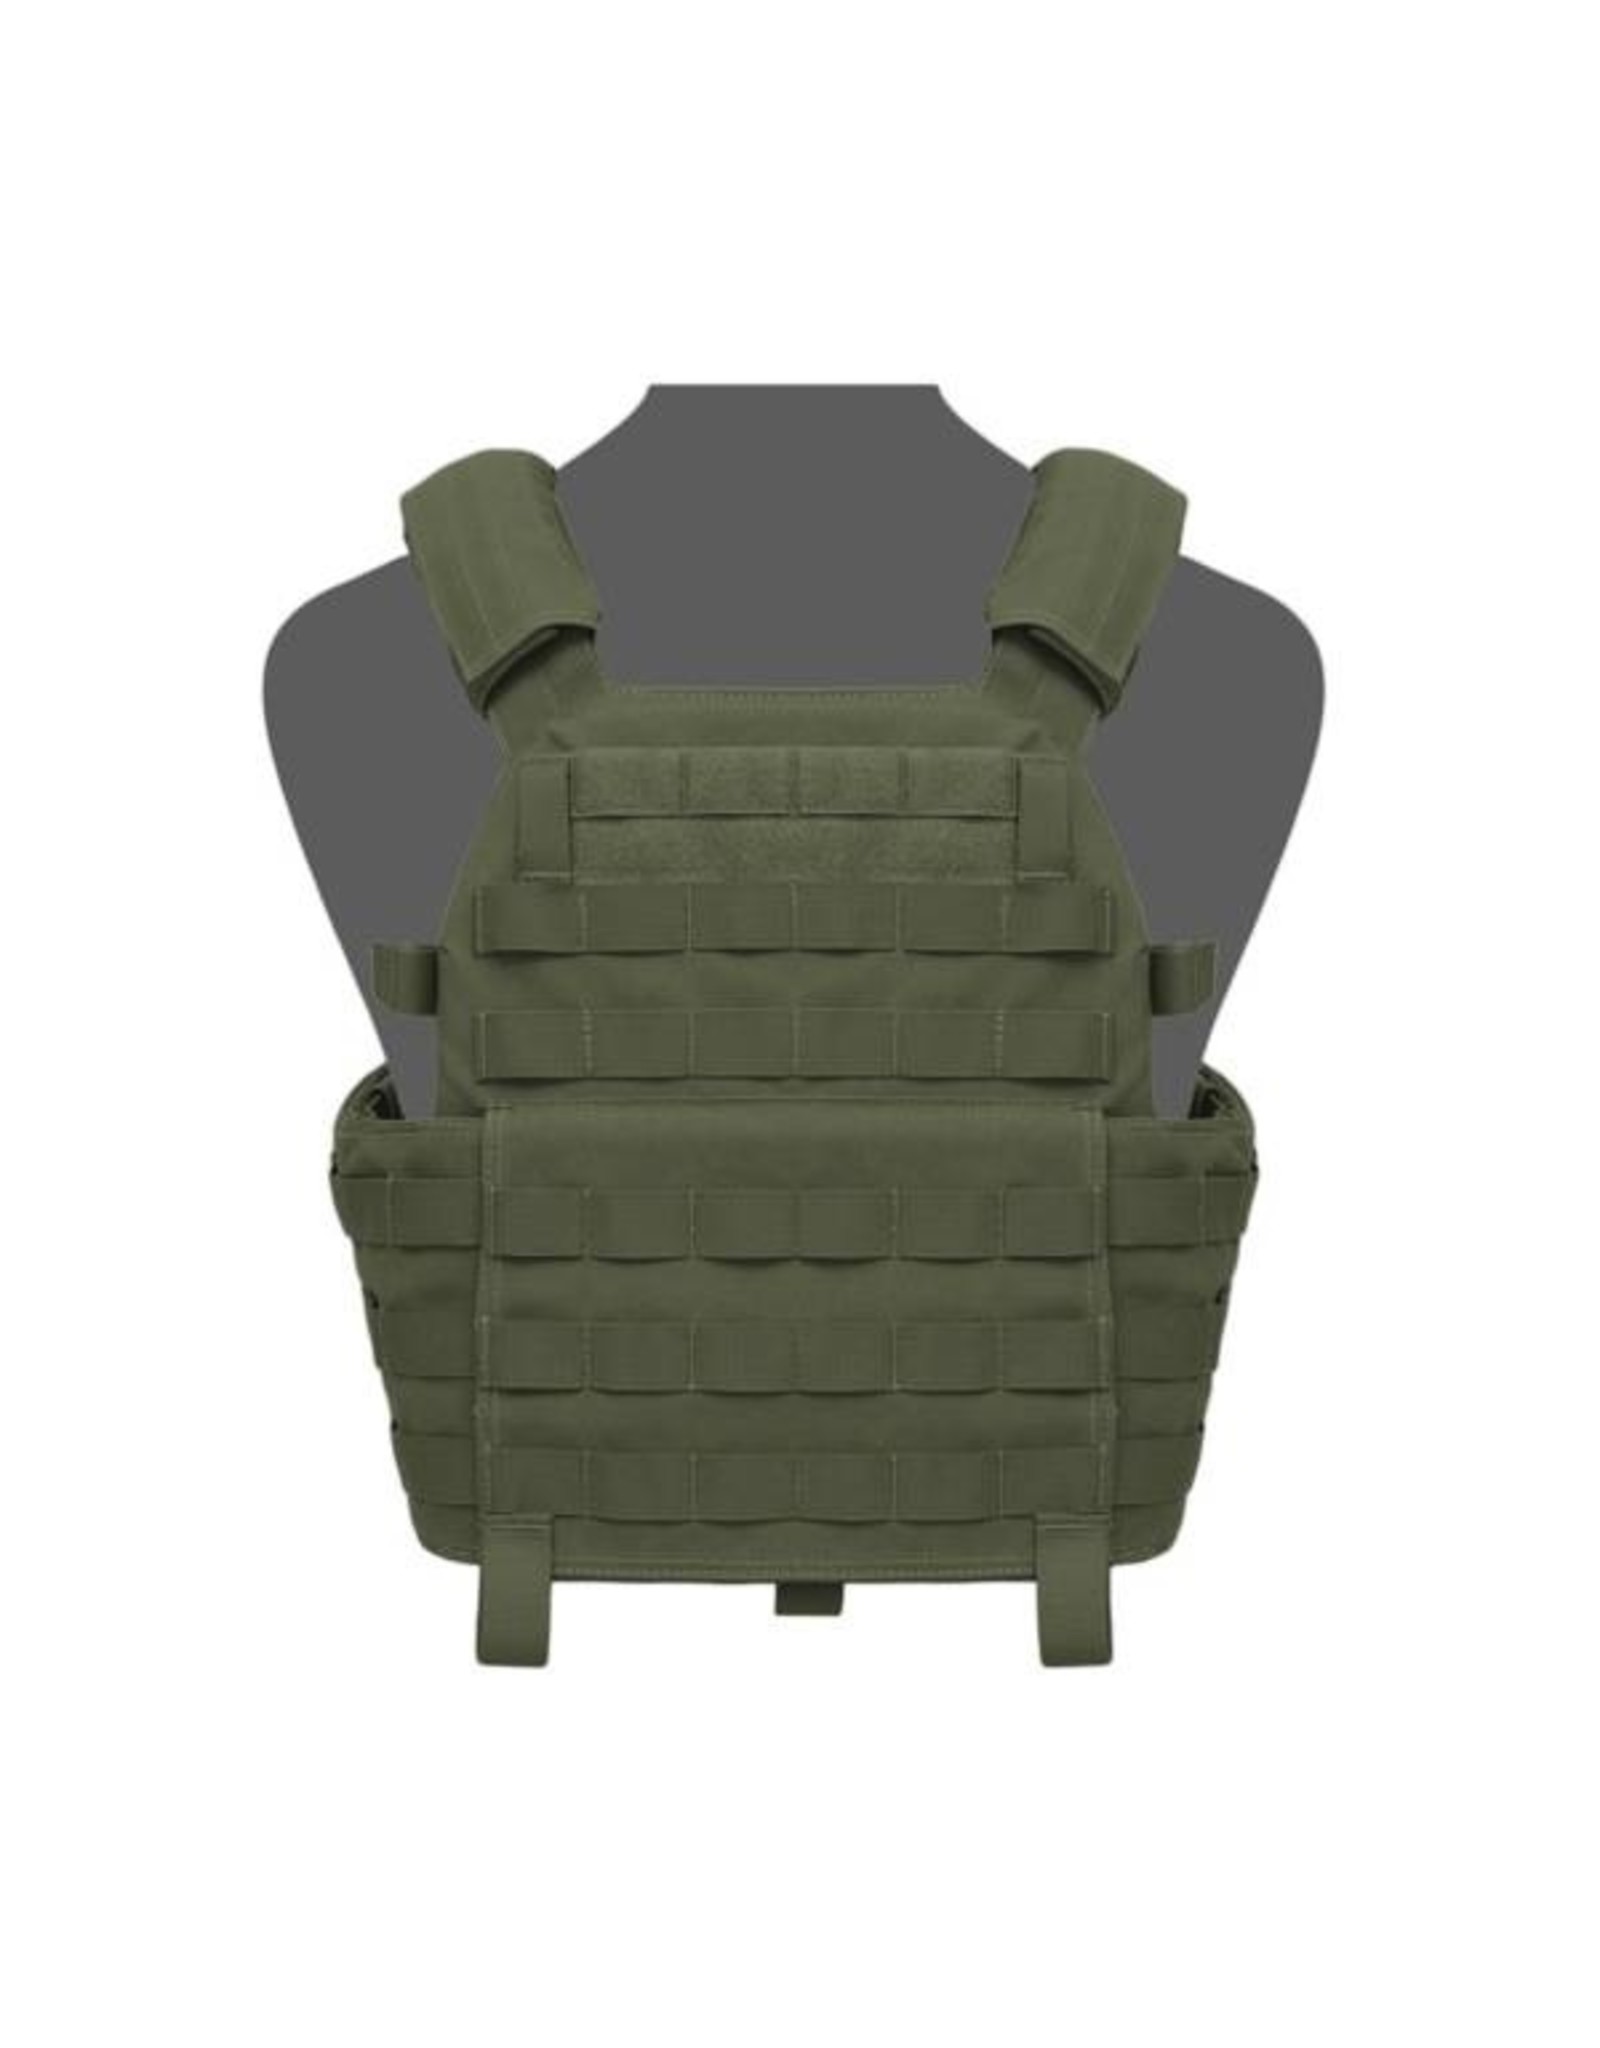 Warrior DCS Special Forces Plate Carrier Base - Olive Drab